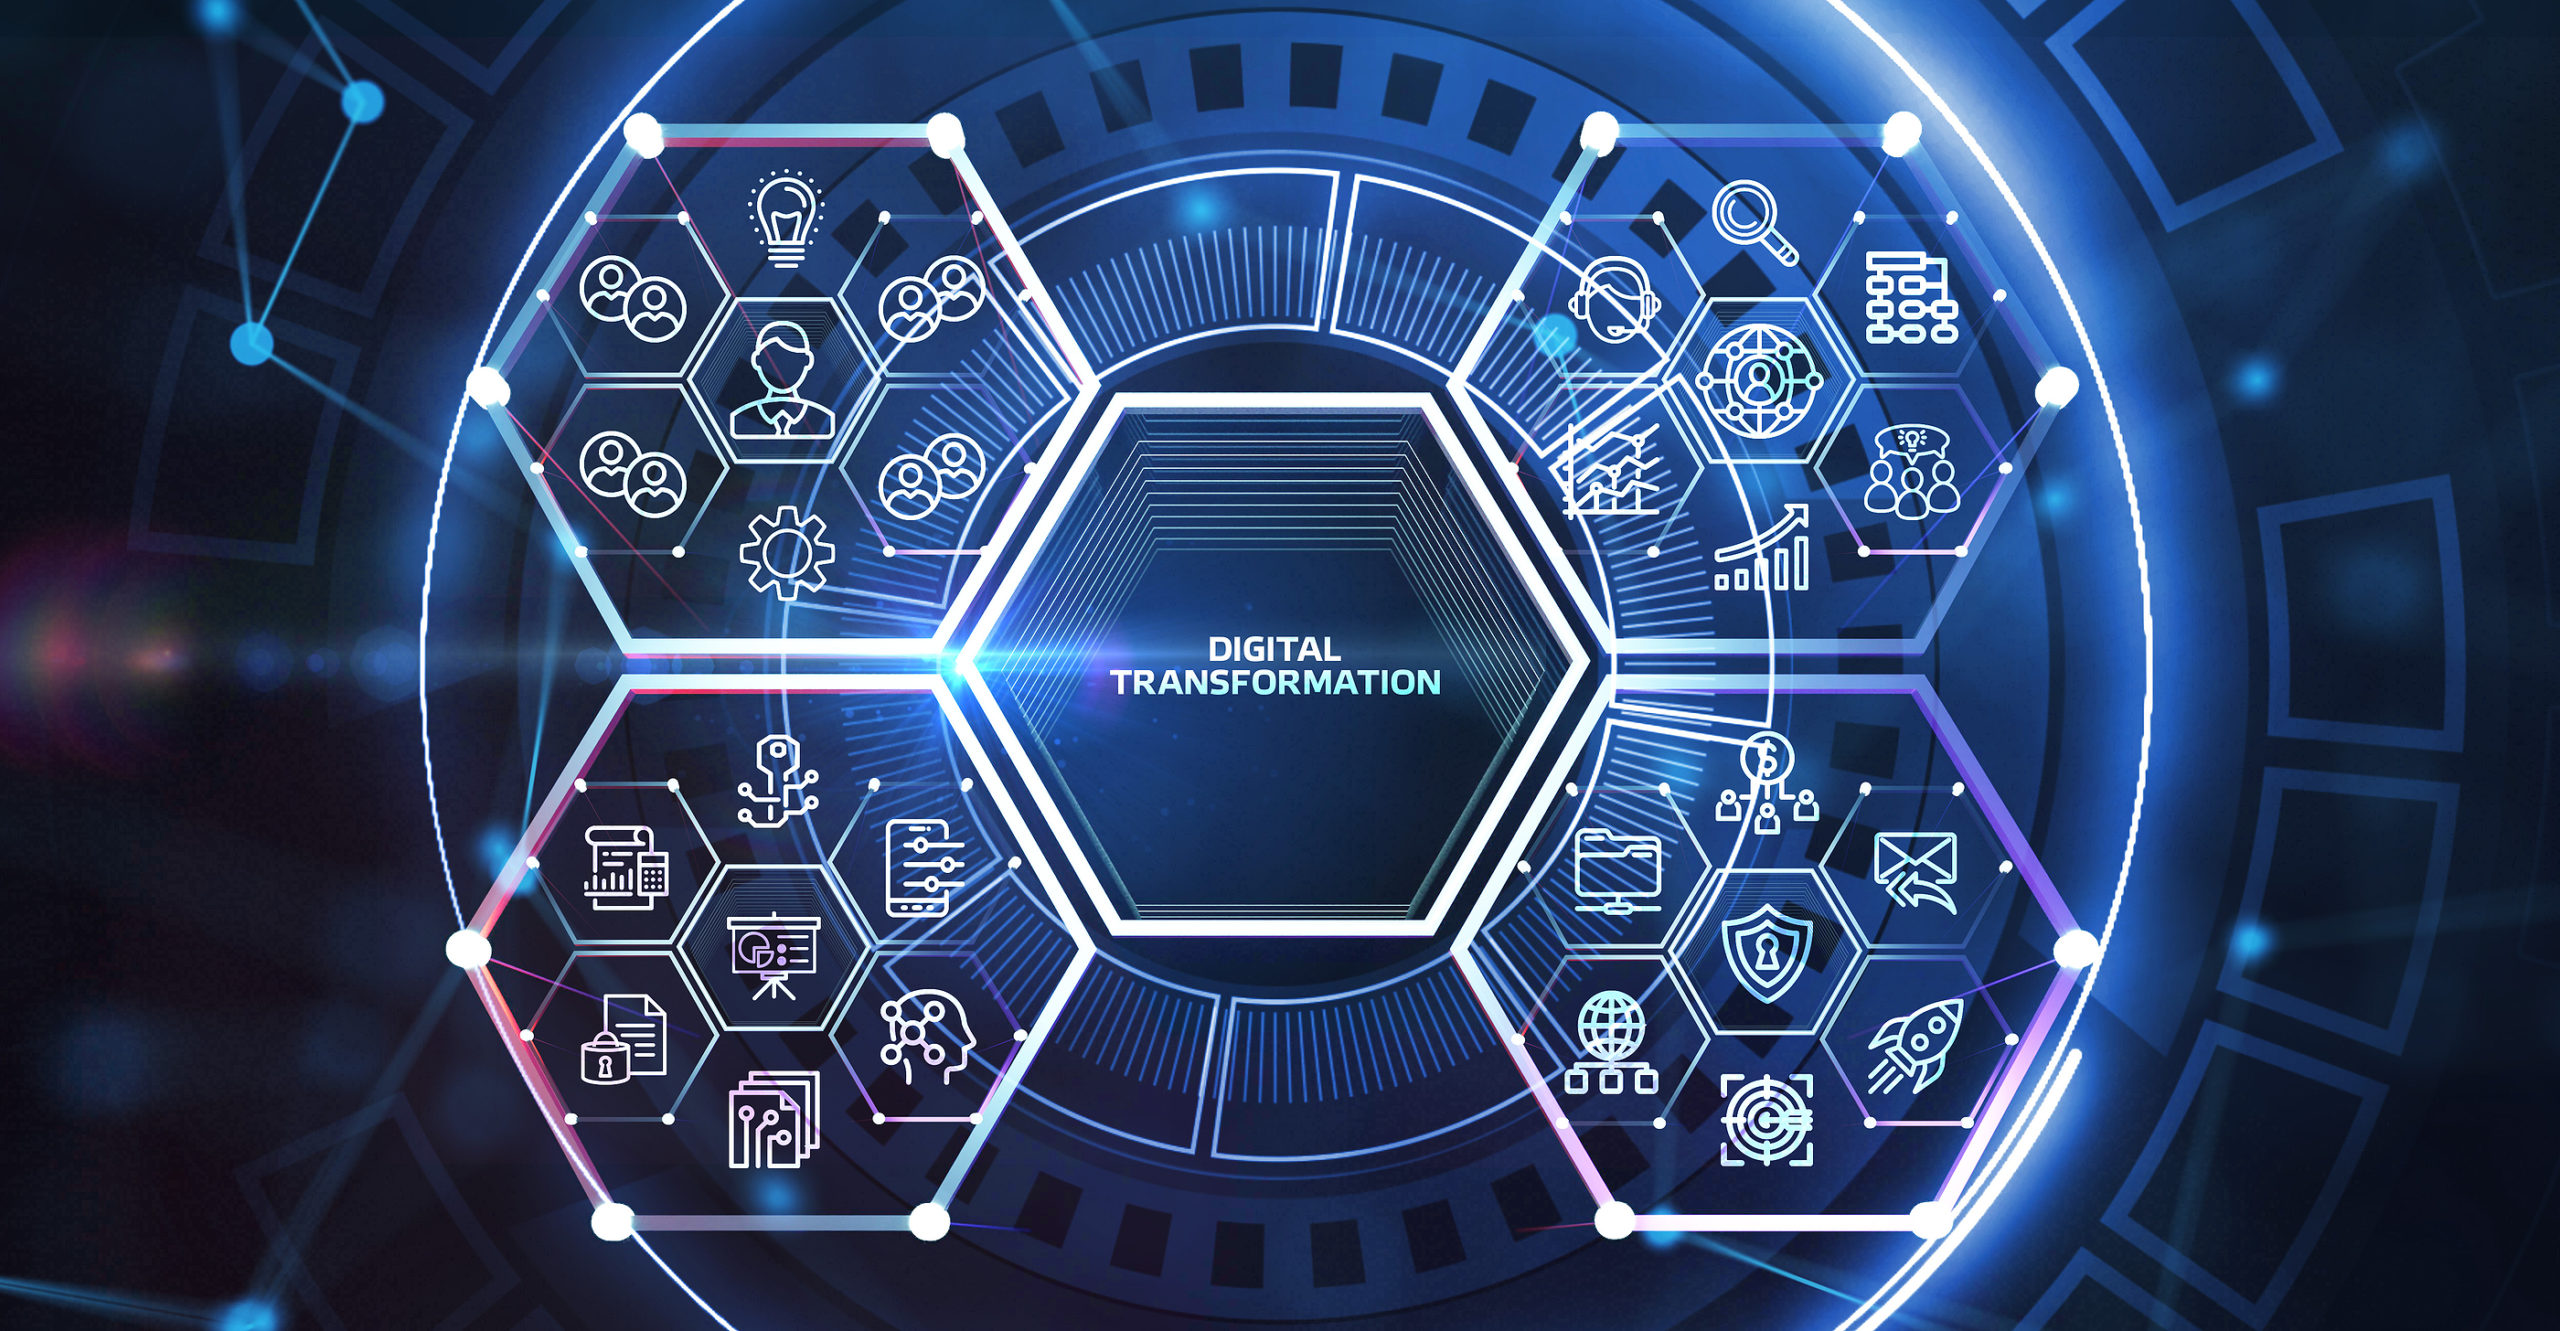 A Simple Concept That Can Accelerate Digital Transformation - IEEE  Innovation at Work